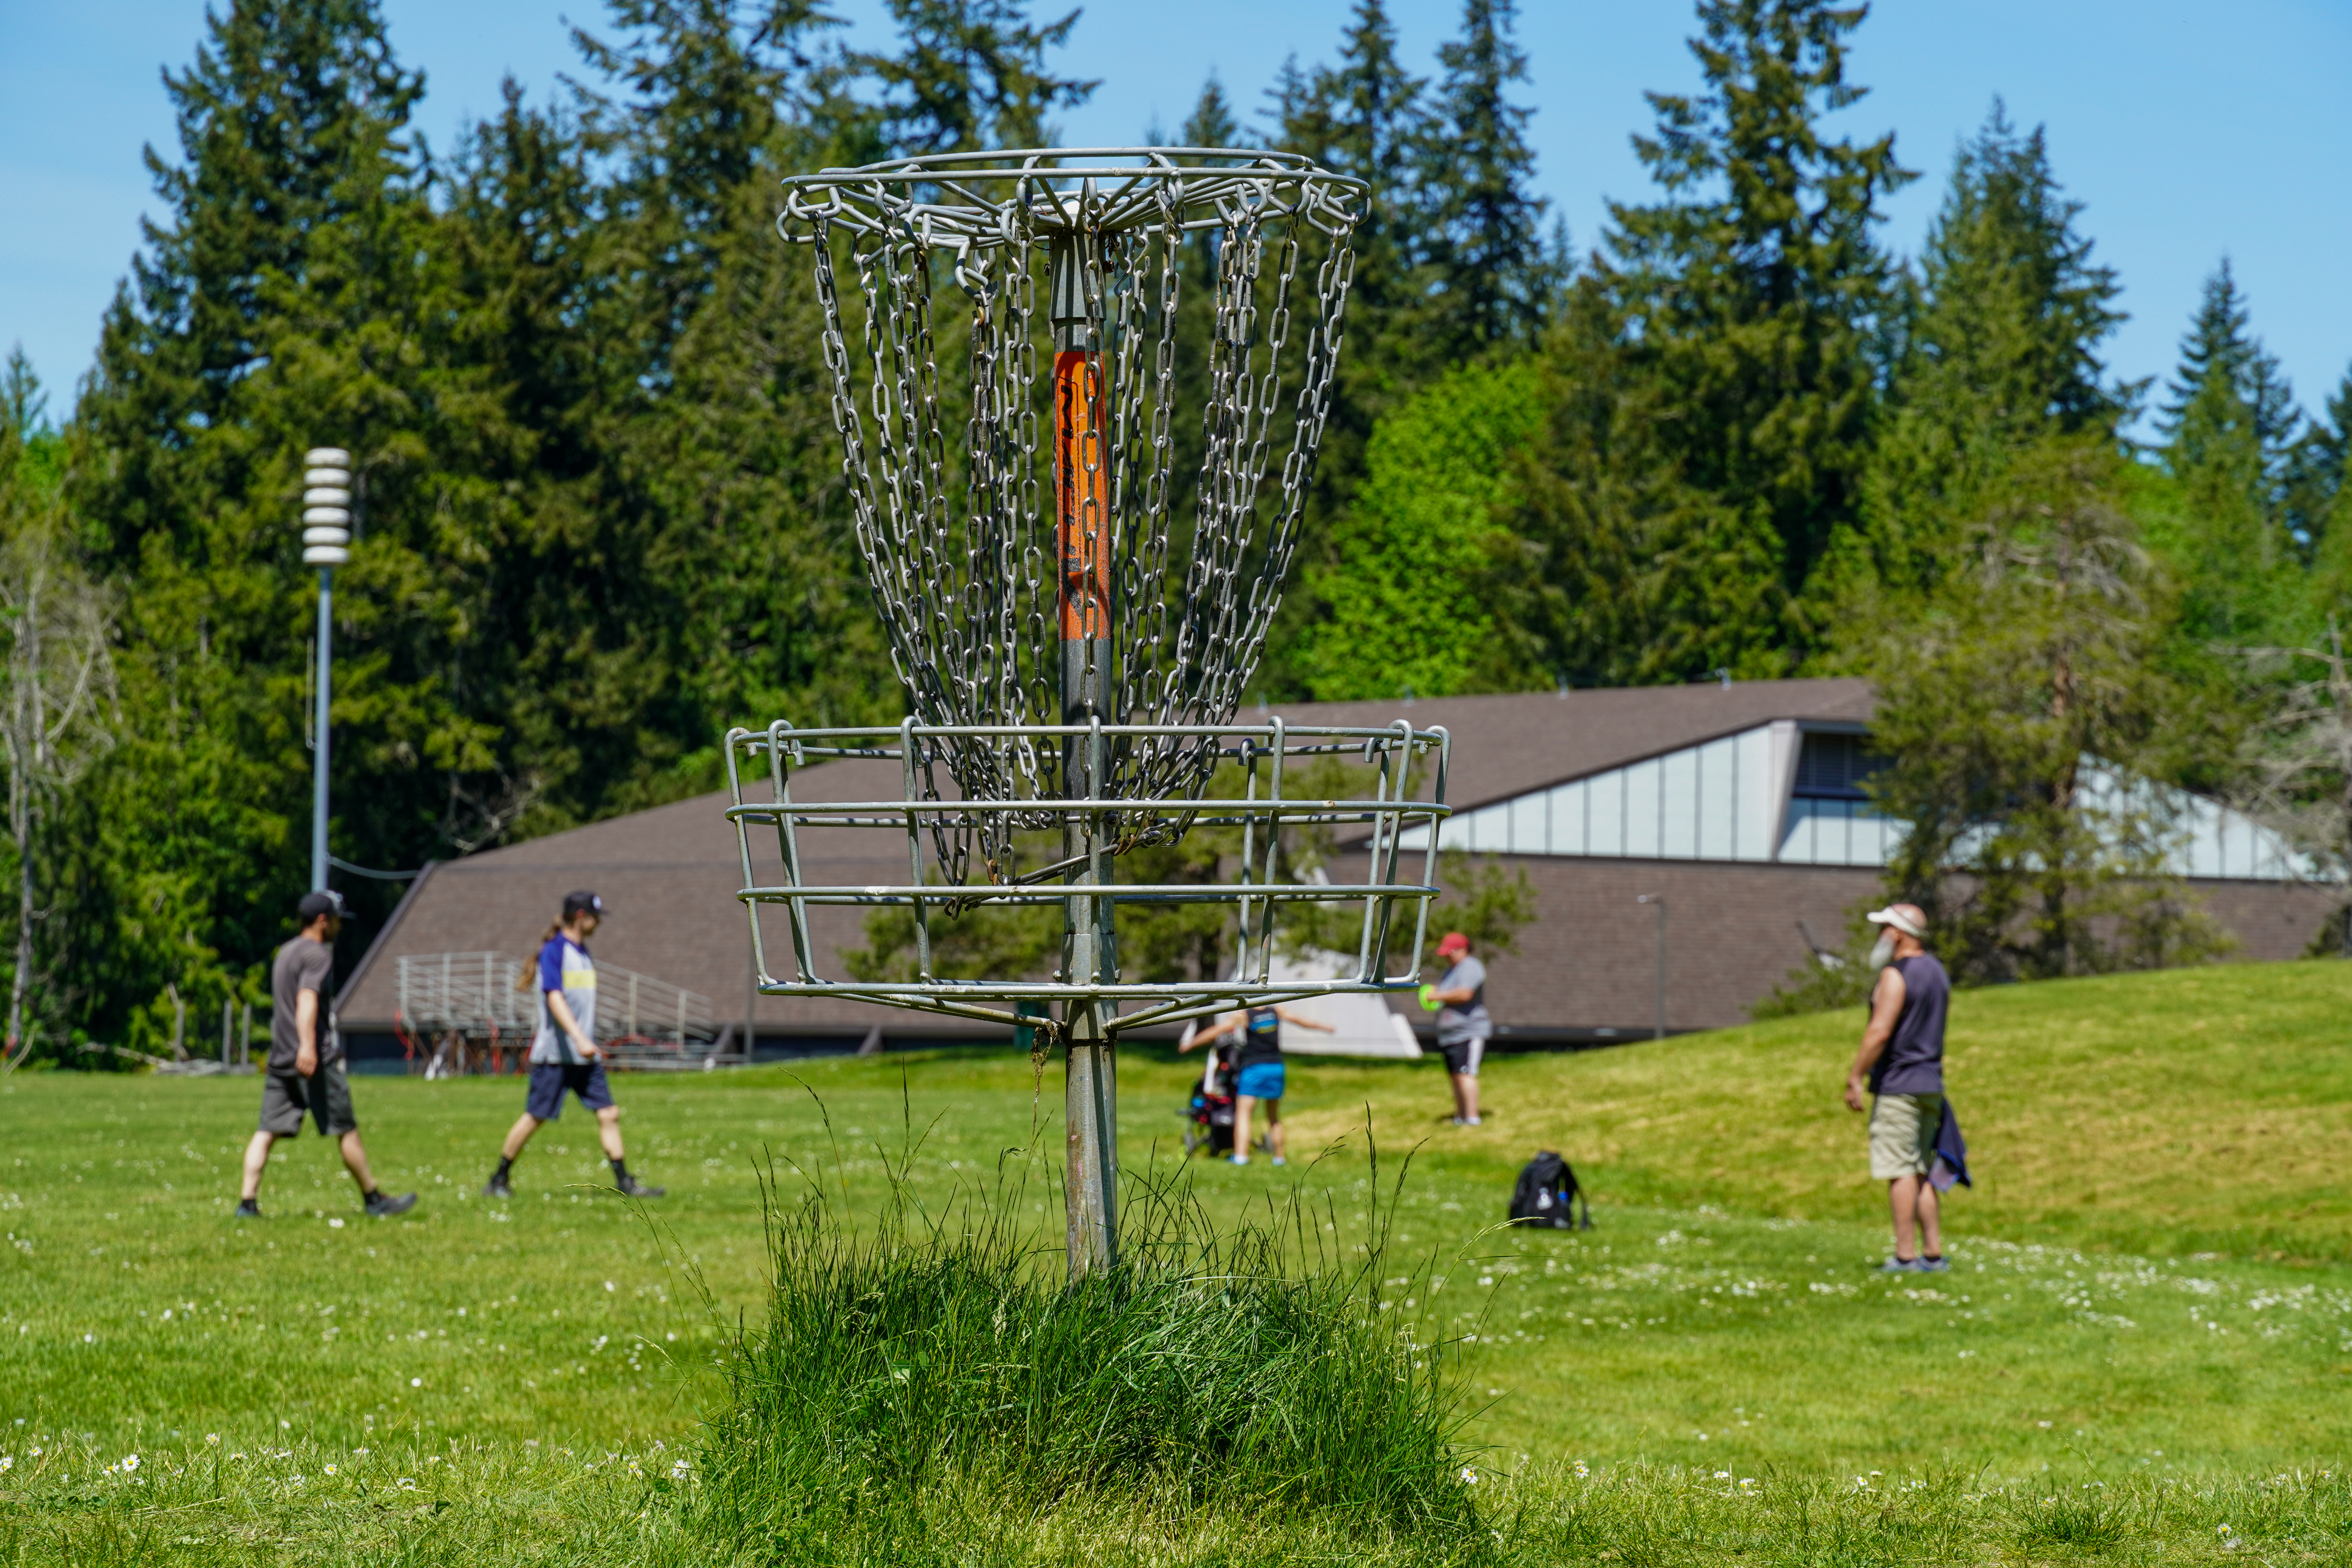 Disc Golf photos from Sunday, July 14th